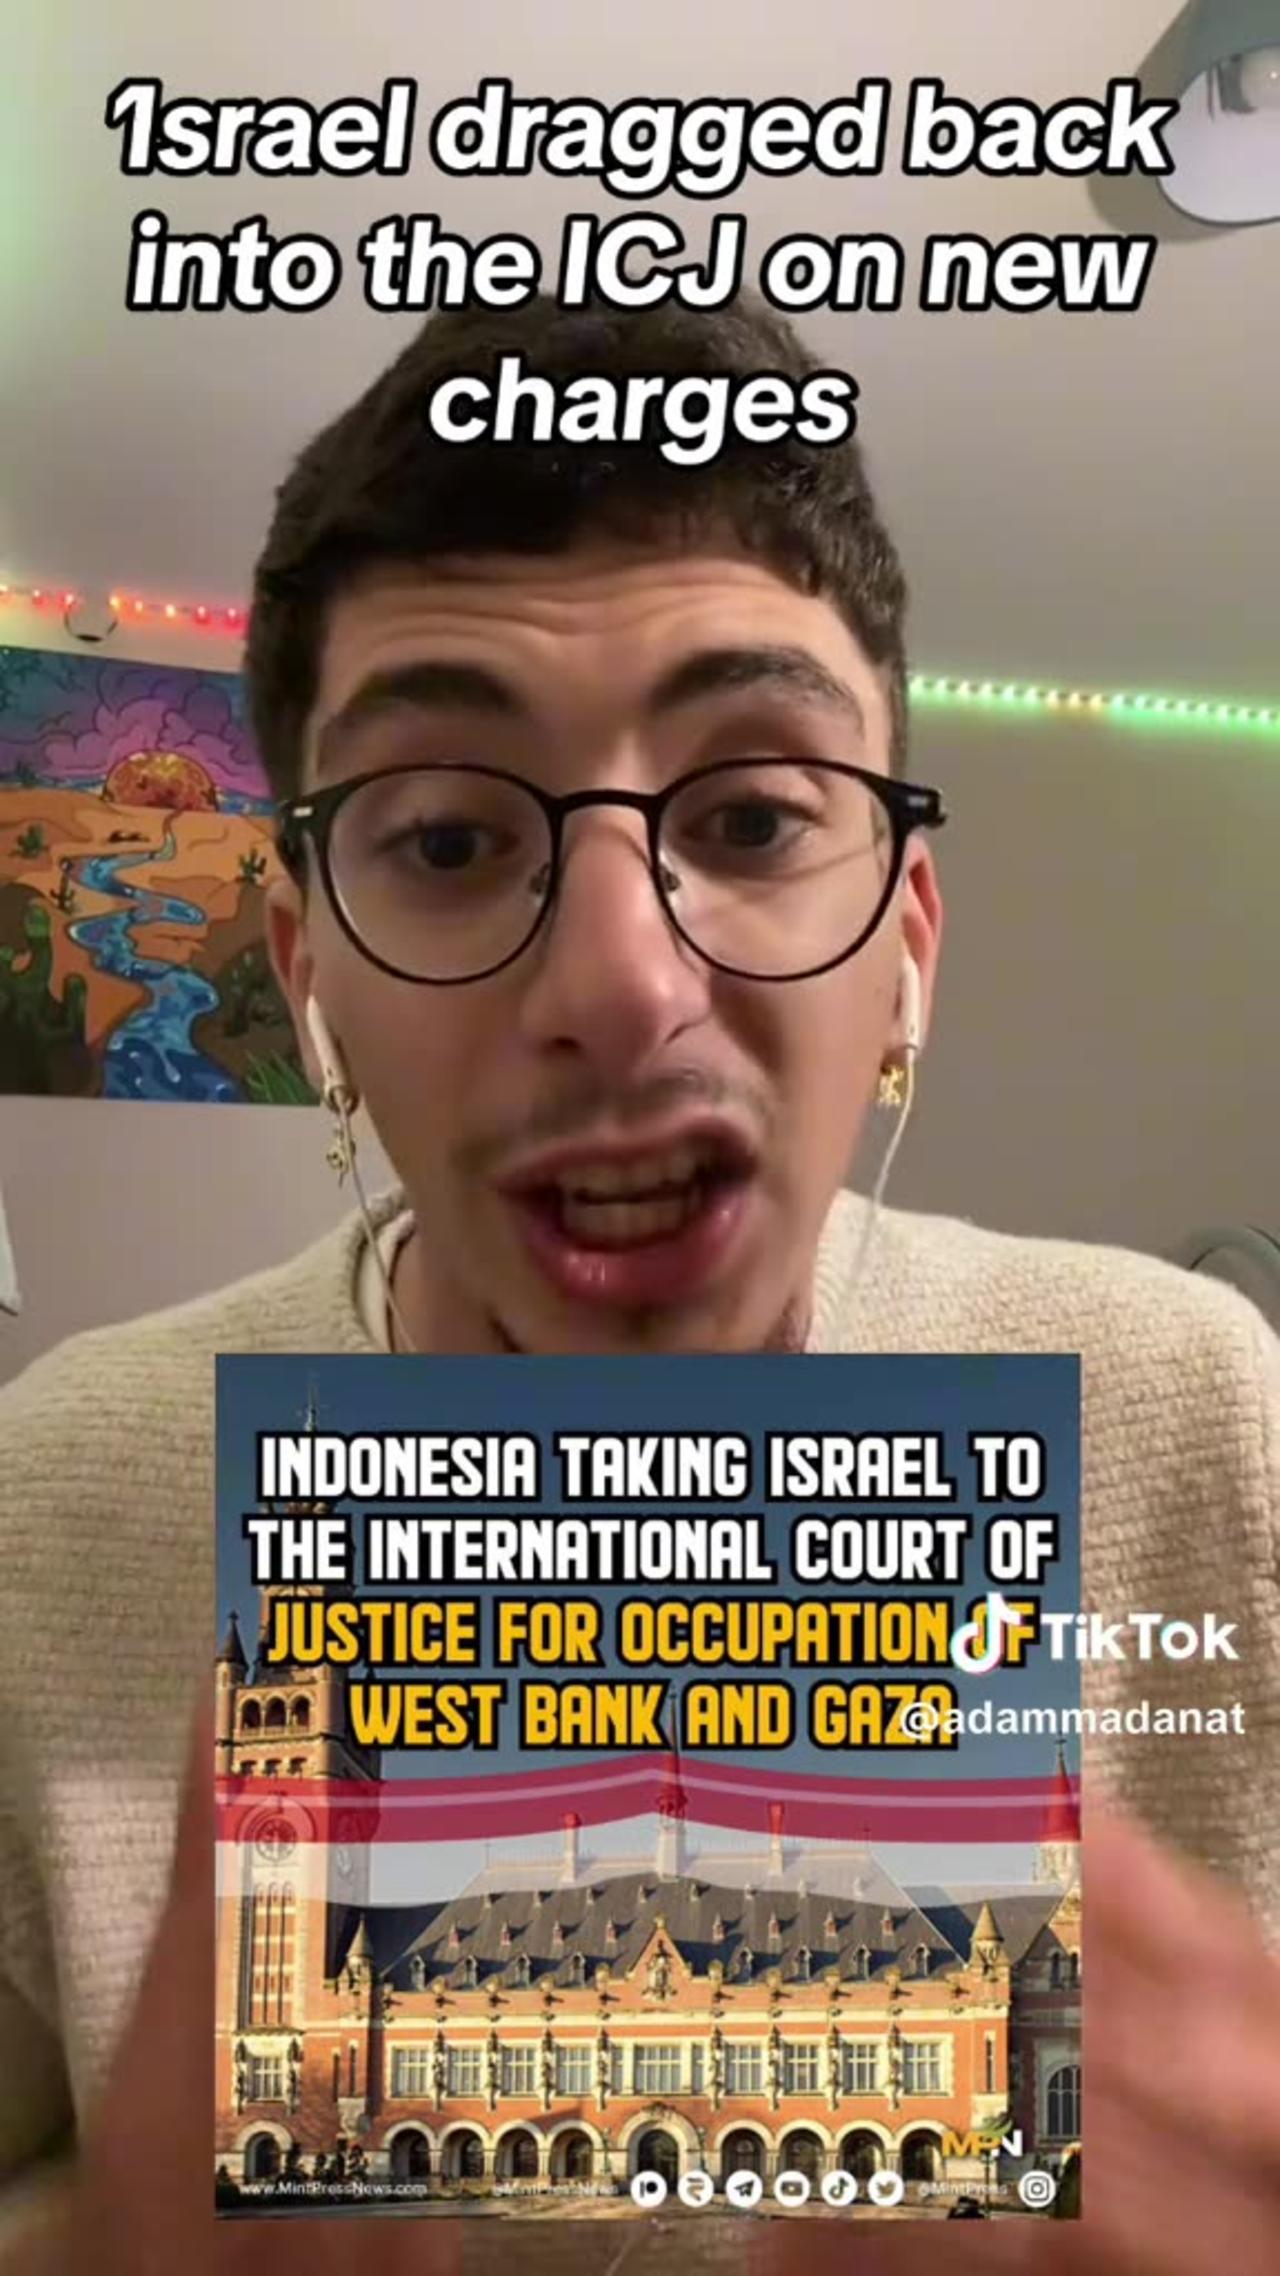 Indonesia taking Israel to the International Court of Justice for Occupation of West Bank and Gaza